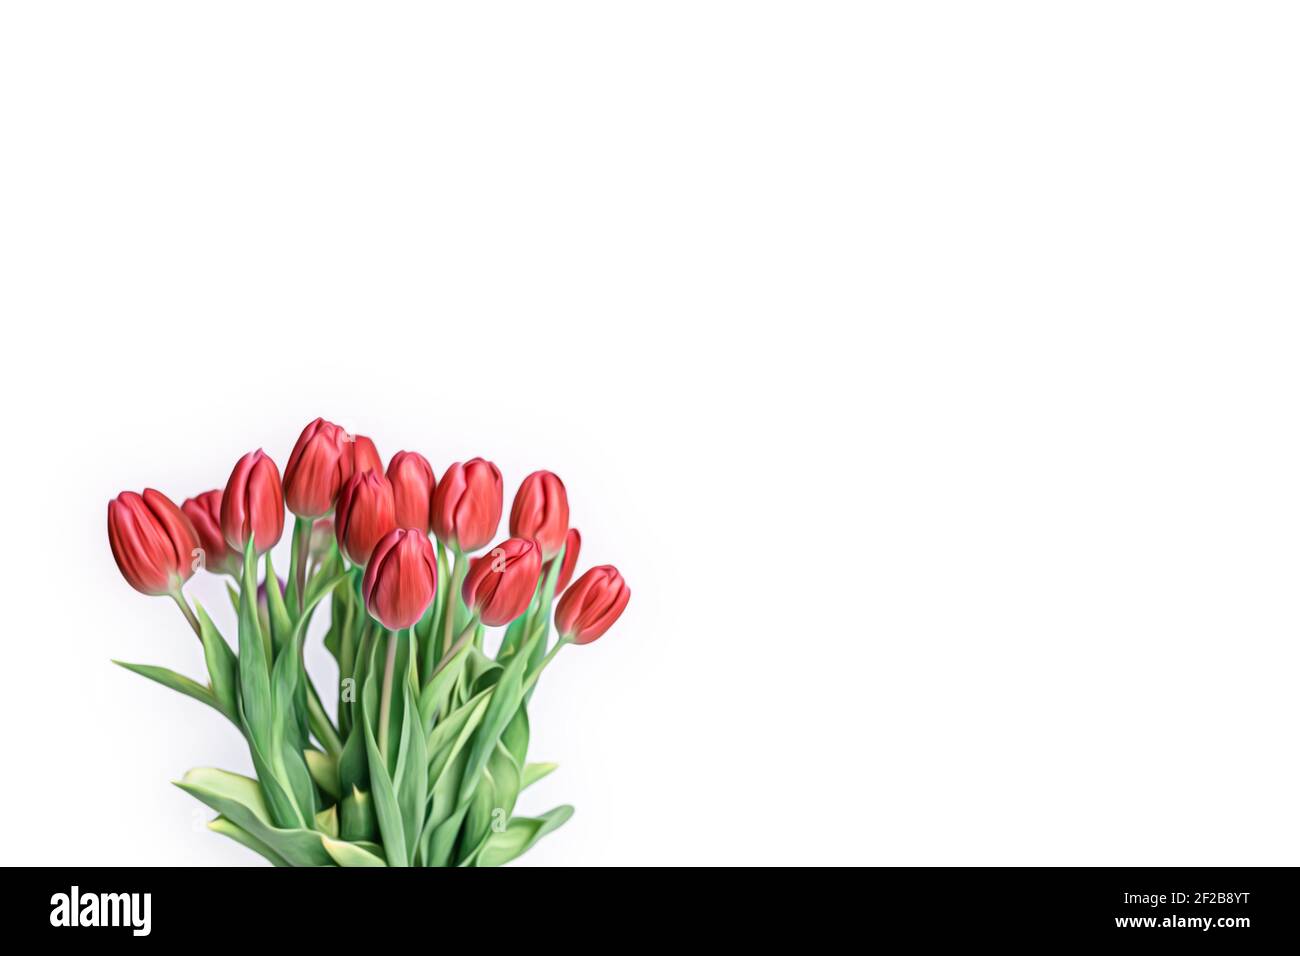 Fresh picked red tulips near a white panel window Stock Photo